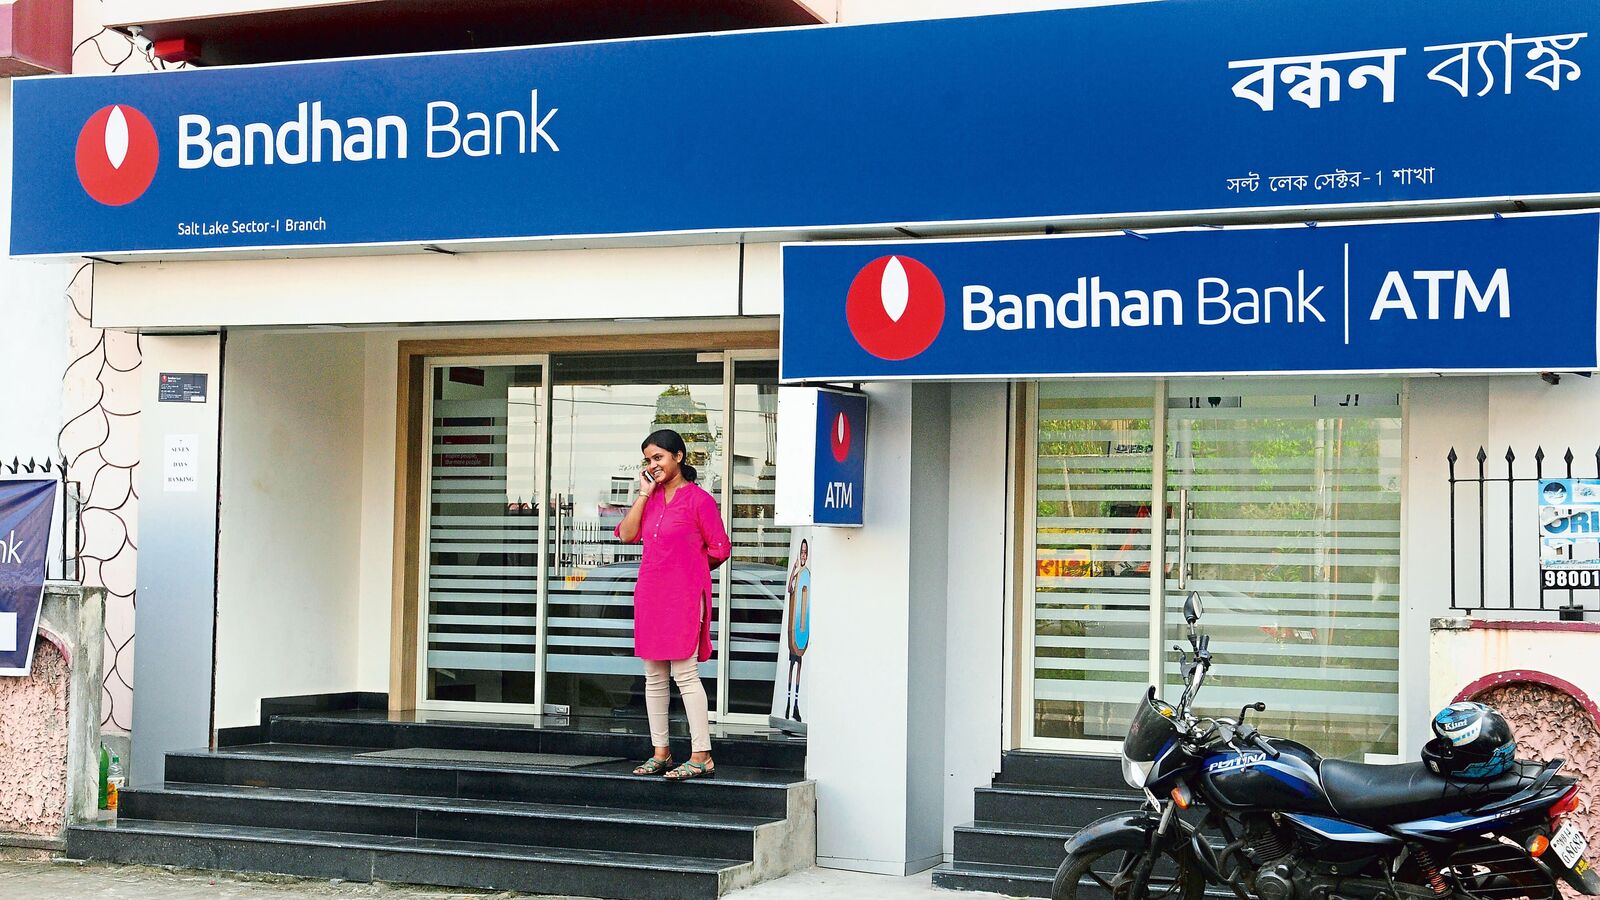 Bandhan Bank share price falls over 9% after MD & CEO resigns; Jefferies downgrades stock, cuts target